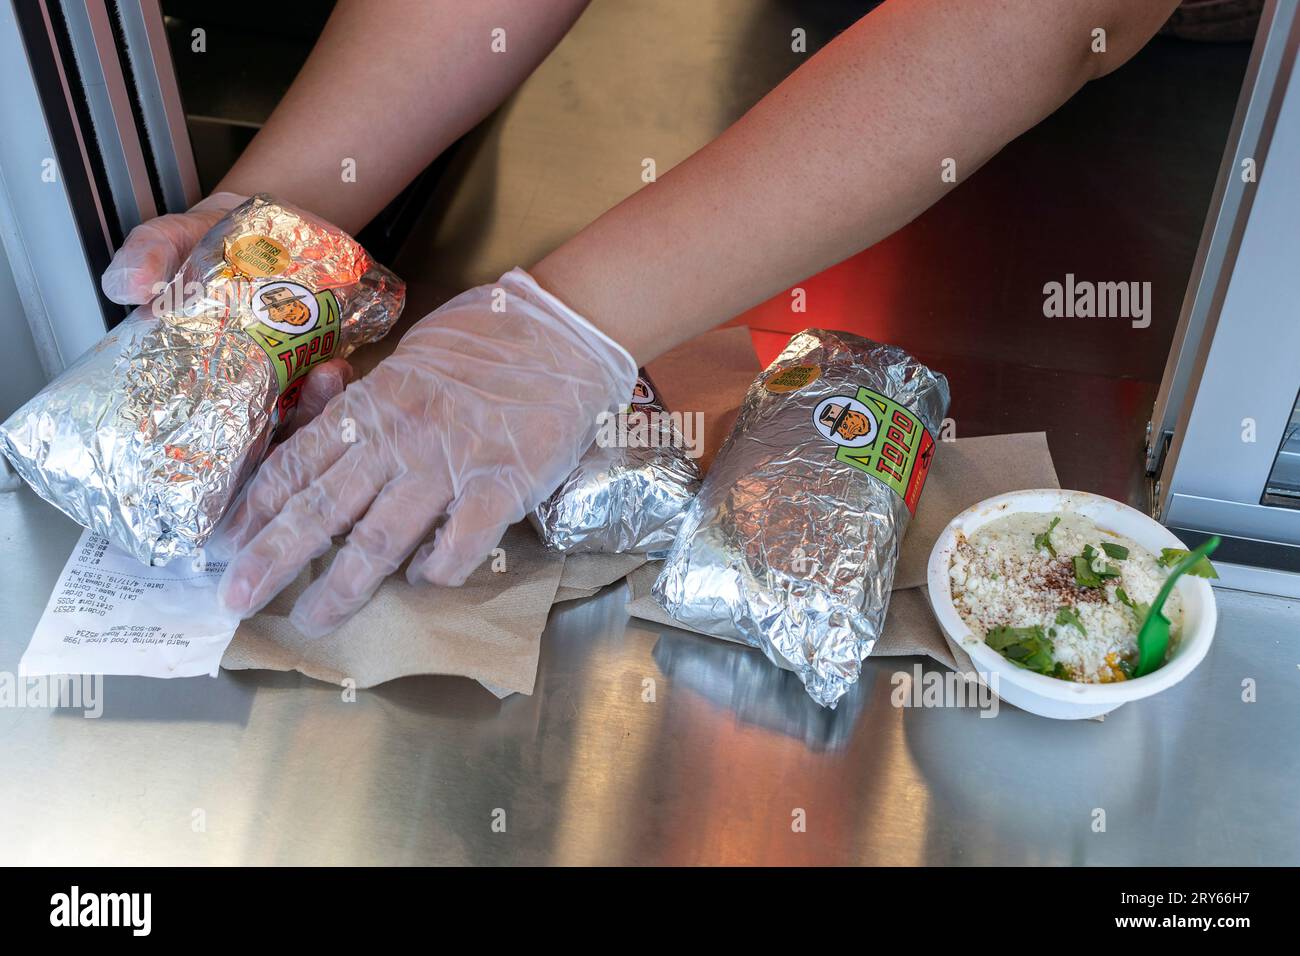 Hands putting food out on stainless counter Stock Photo